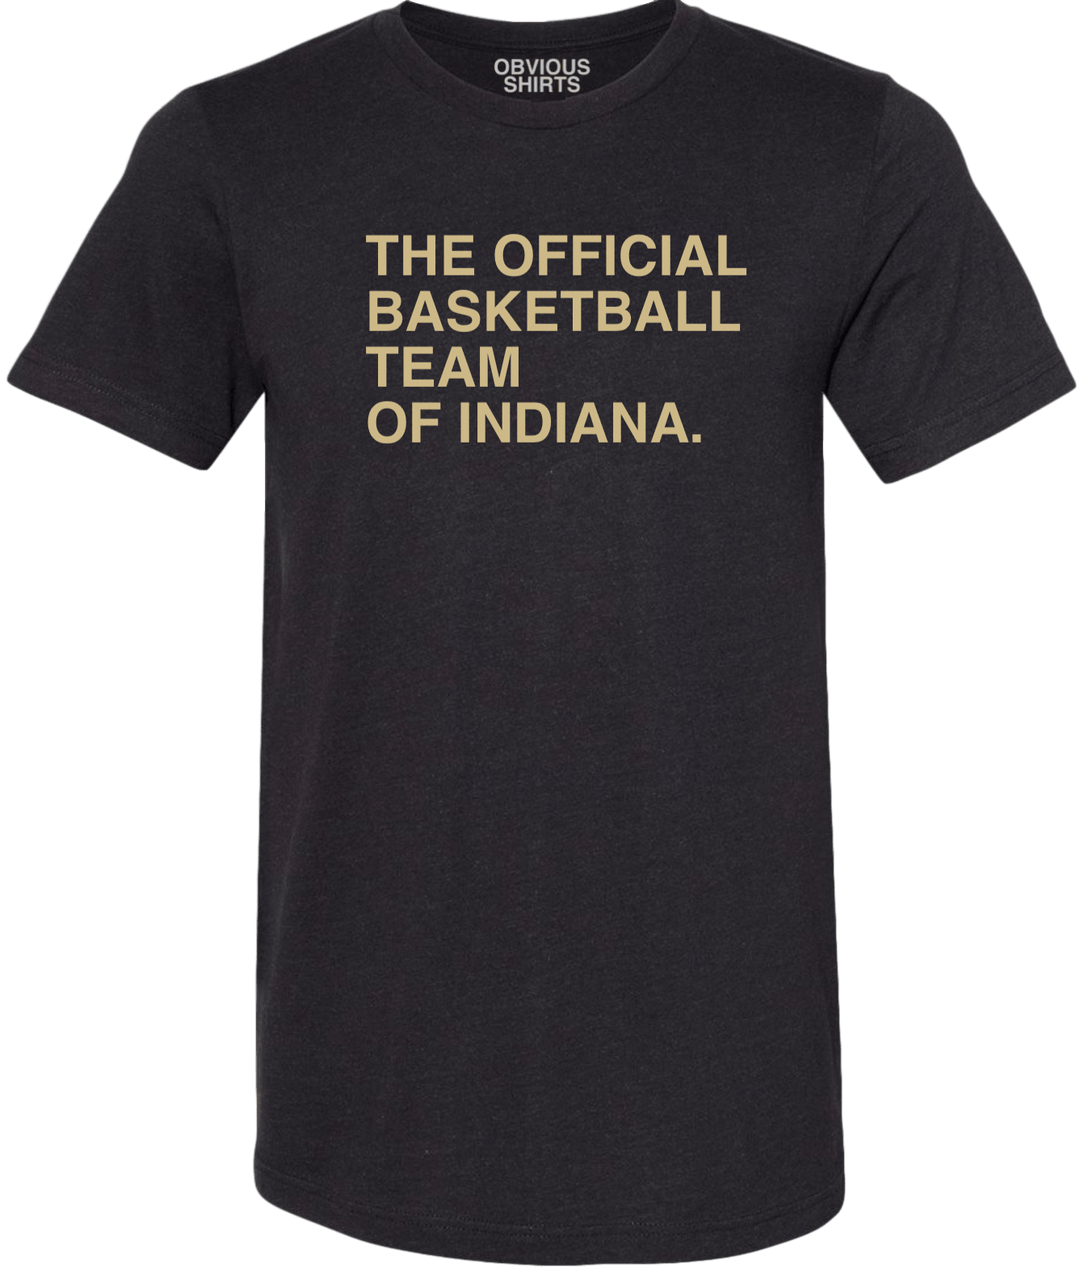 THE OFFICIAL BASKETBALL TEAM OF INDIANA. - OBVIOUS SHIRTS.